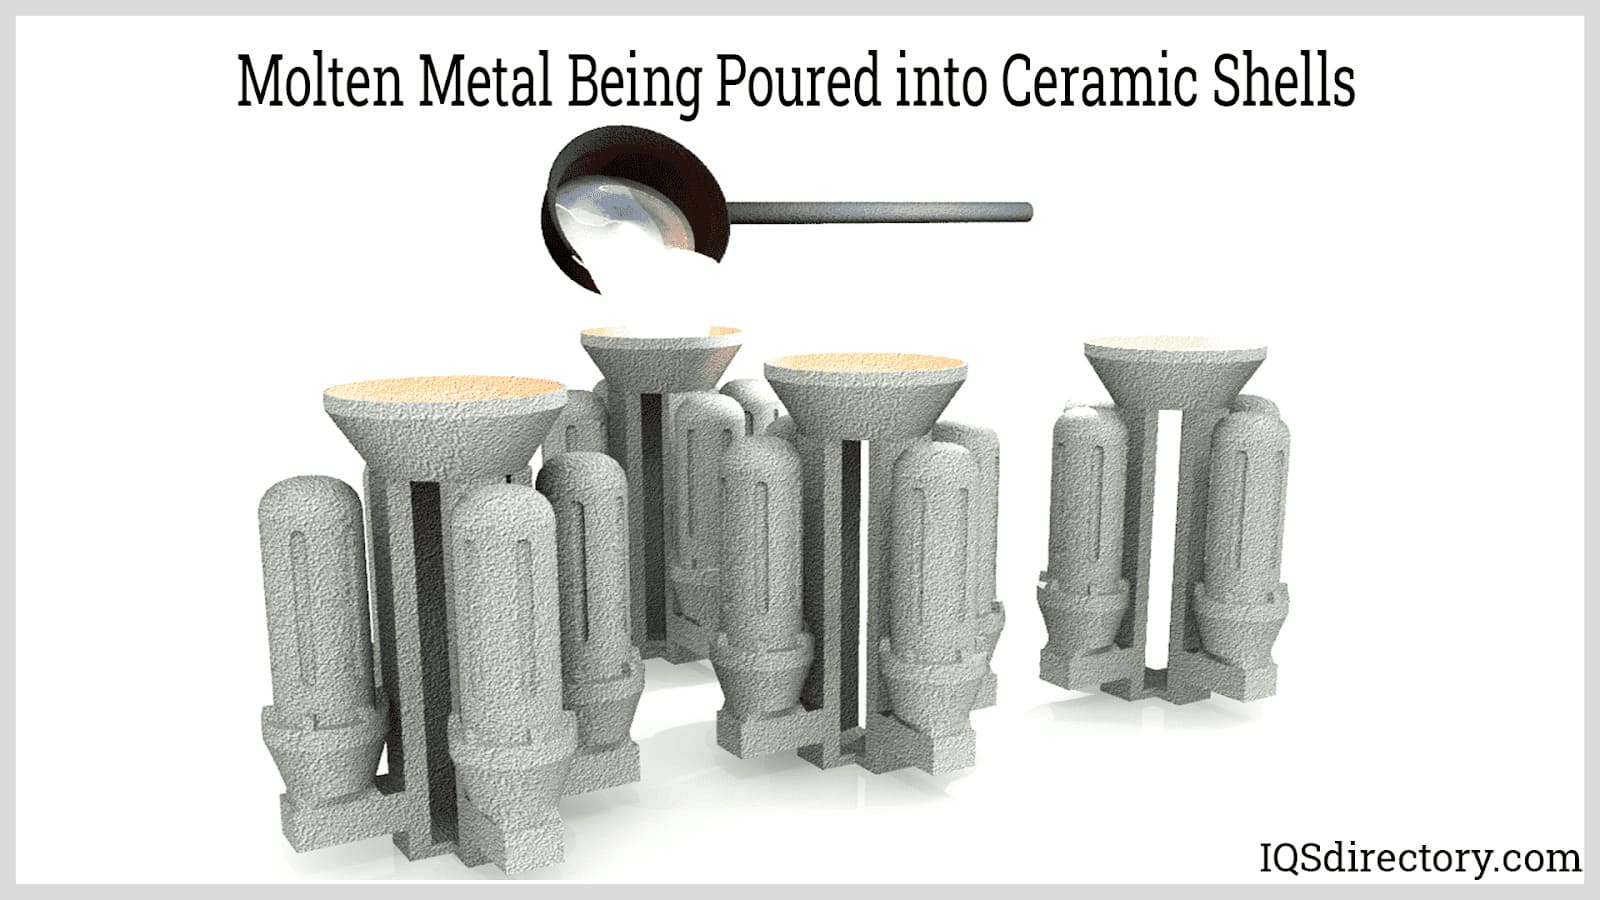 Molten Metal Being Poured into Ceramic Shells